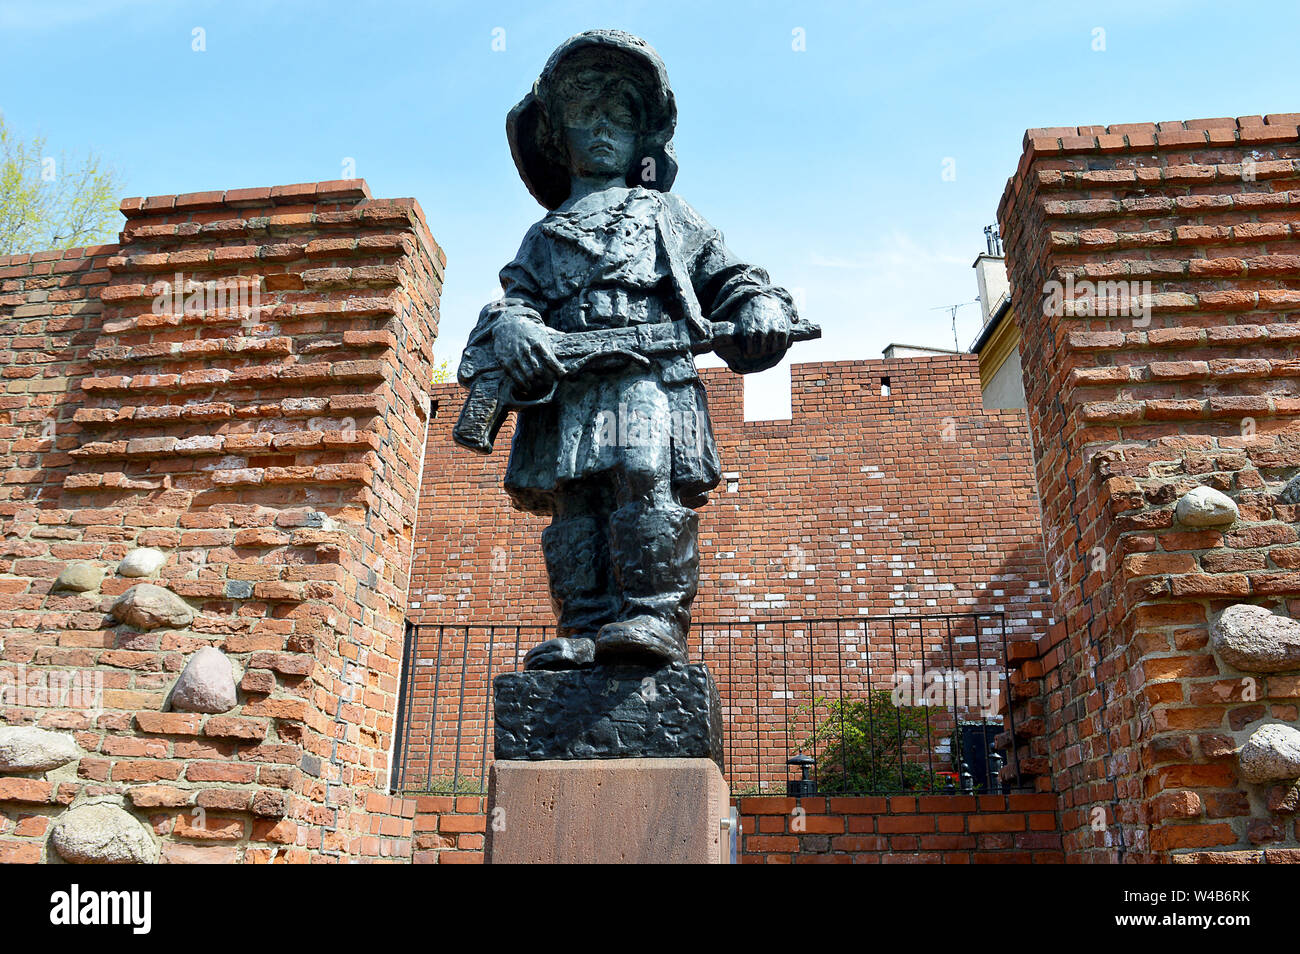 WARSAW, POLAND - 16 APRIL 2019: Statue 'the little insurgent' with helmet and gun commemorates children who served as runners in the Warsaw Uprising. Stock Photo